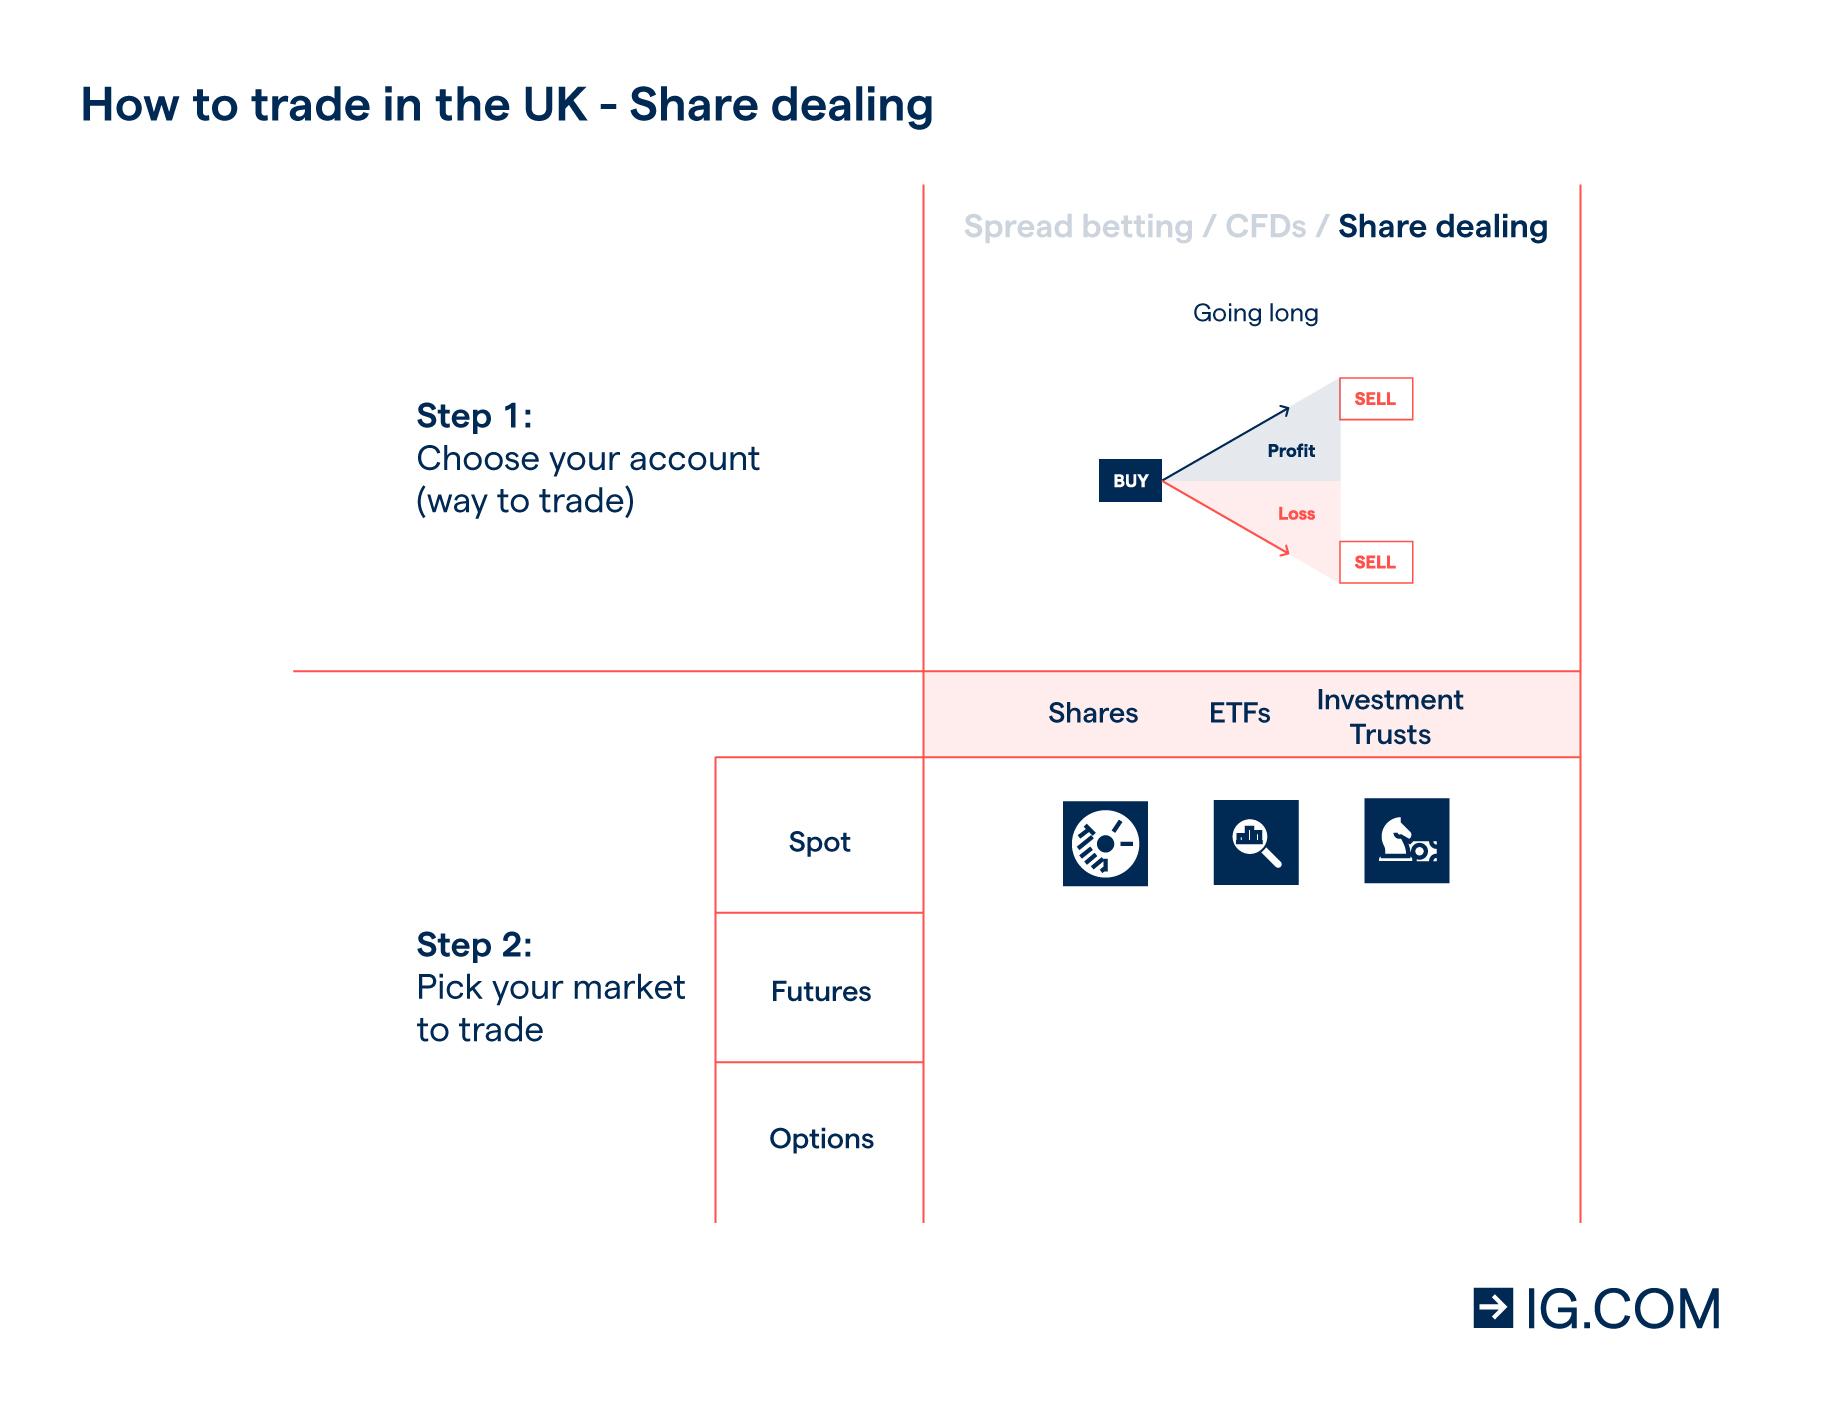 How to trade in the UK - share dealing